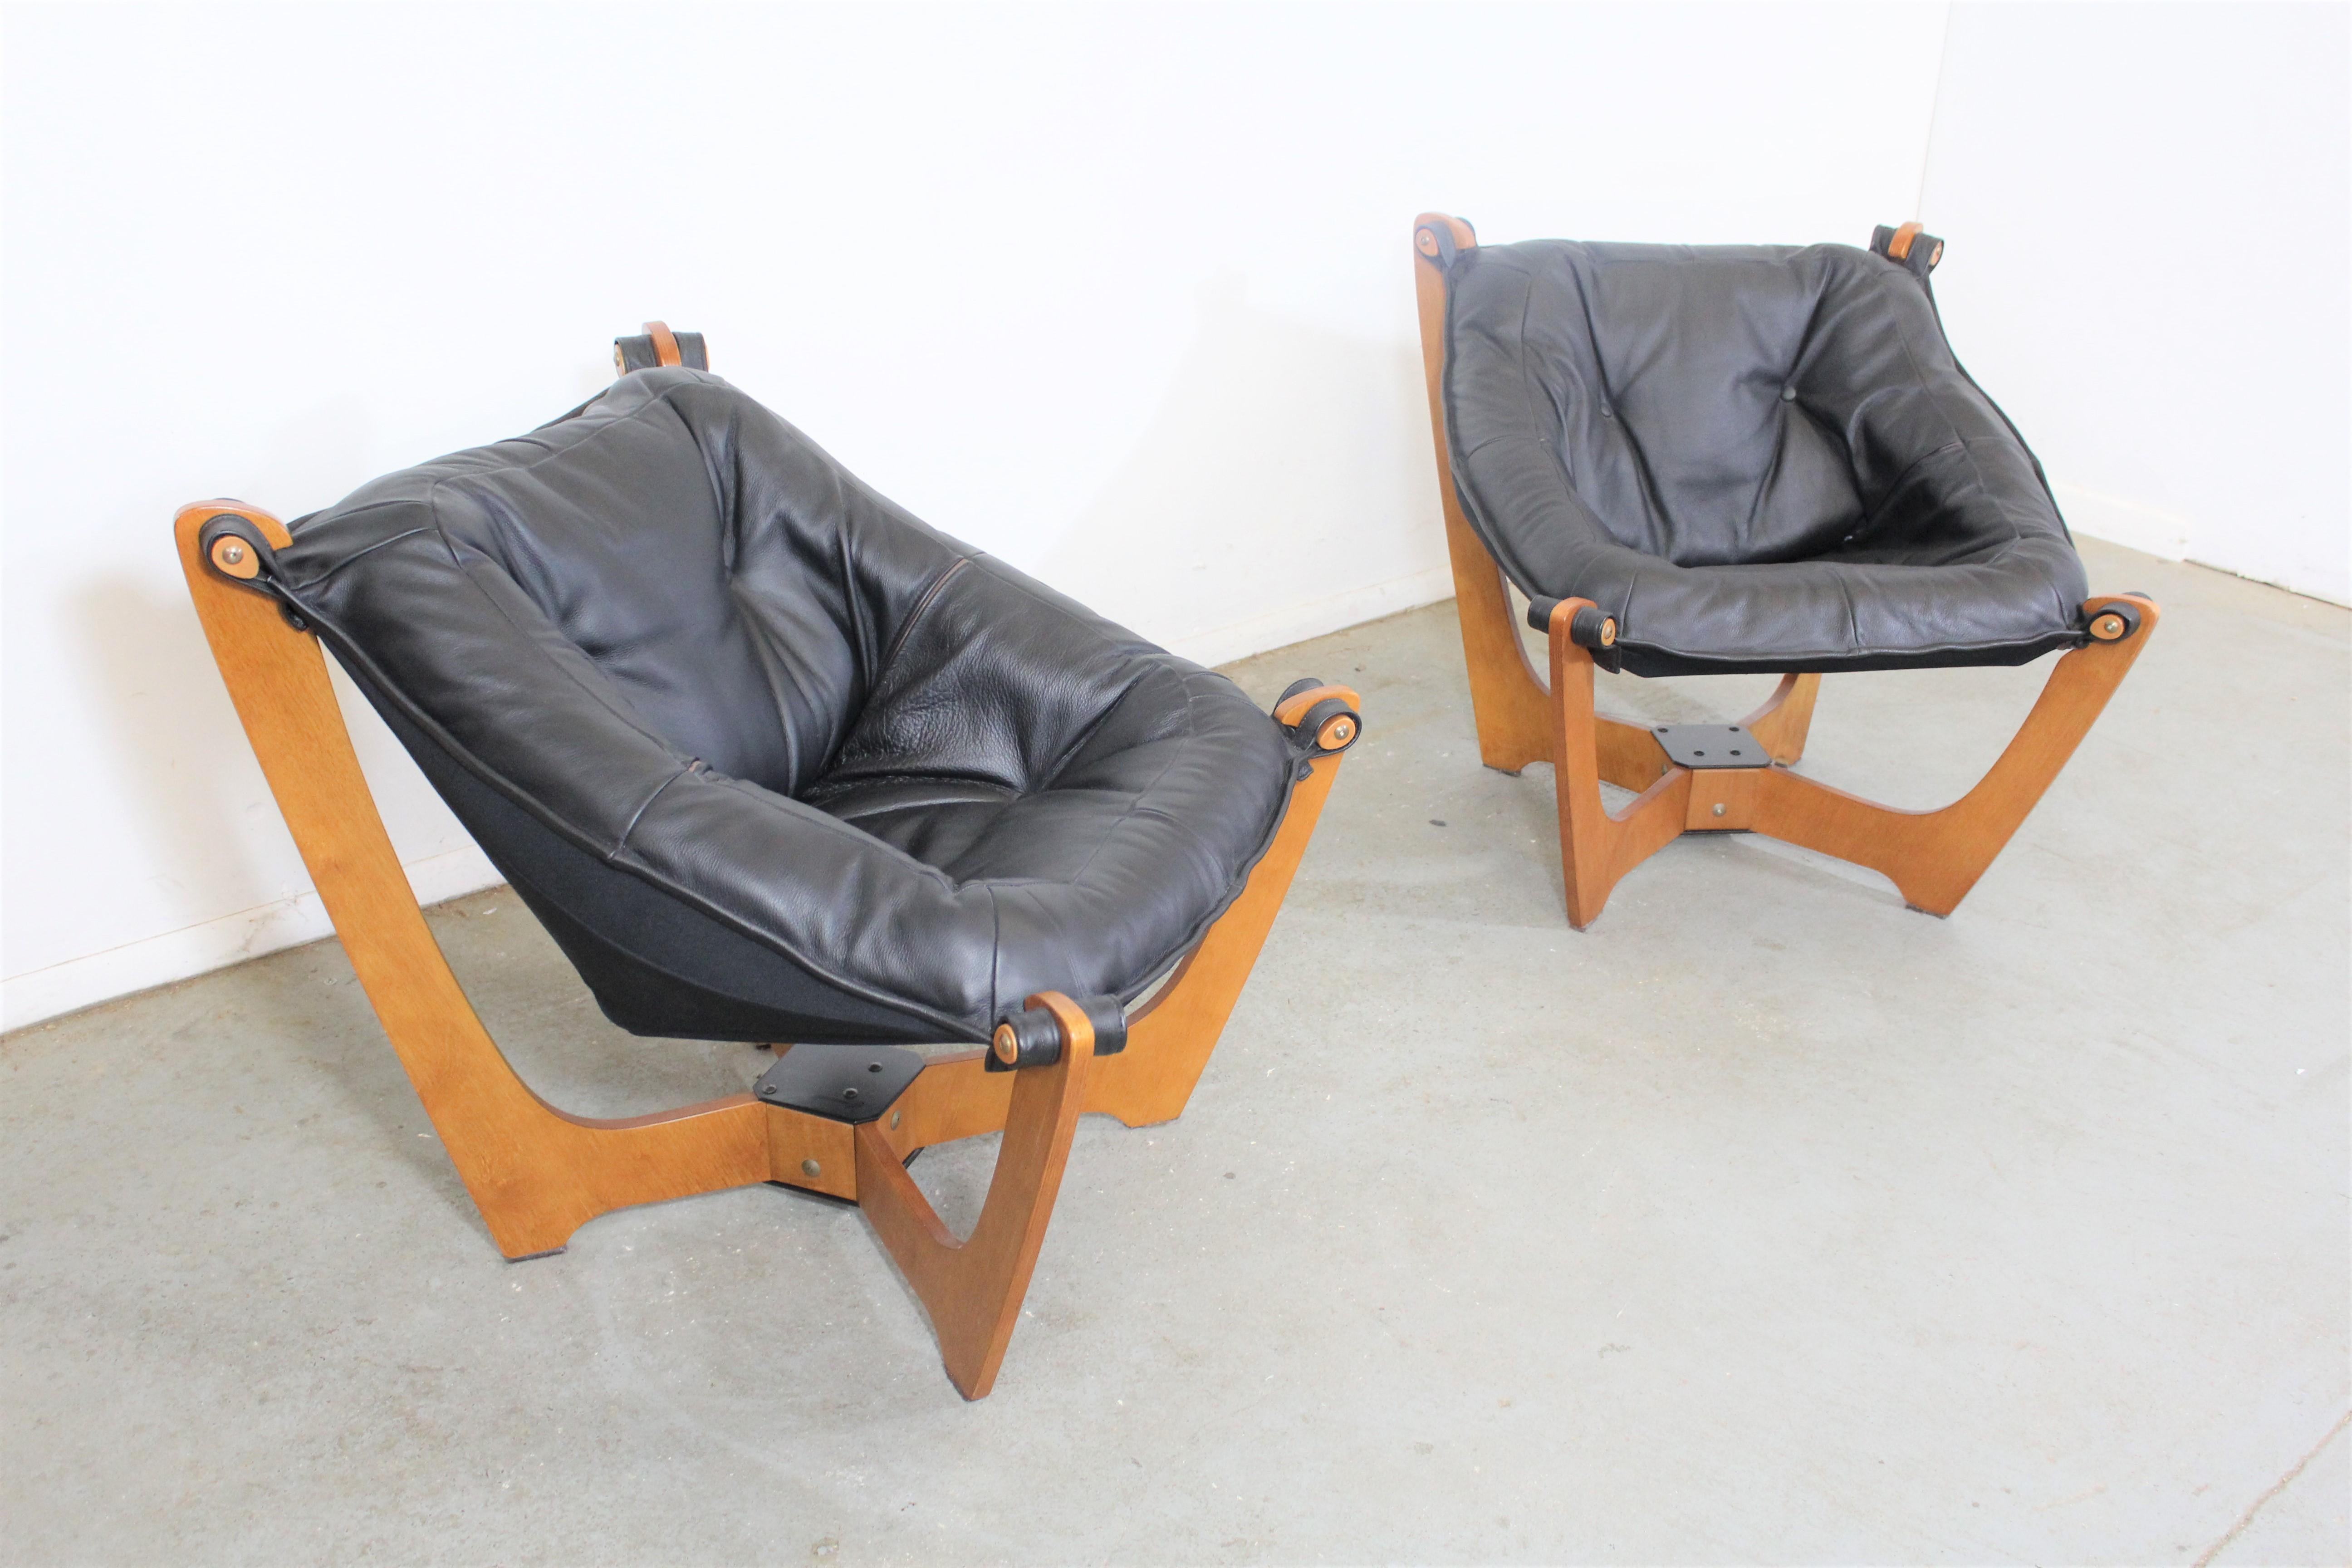 Pair of midcentury Danish modern odd Knutsen lounge chairs

Offered is a pair of vintage midcentury Danish modern lounge chairs. These Luna low back leather lounge chairs are made by Norwegian designer Odd Knutsen. They will provide character and